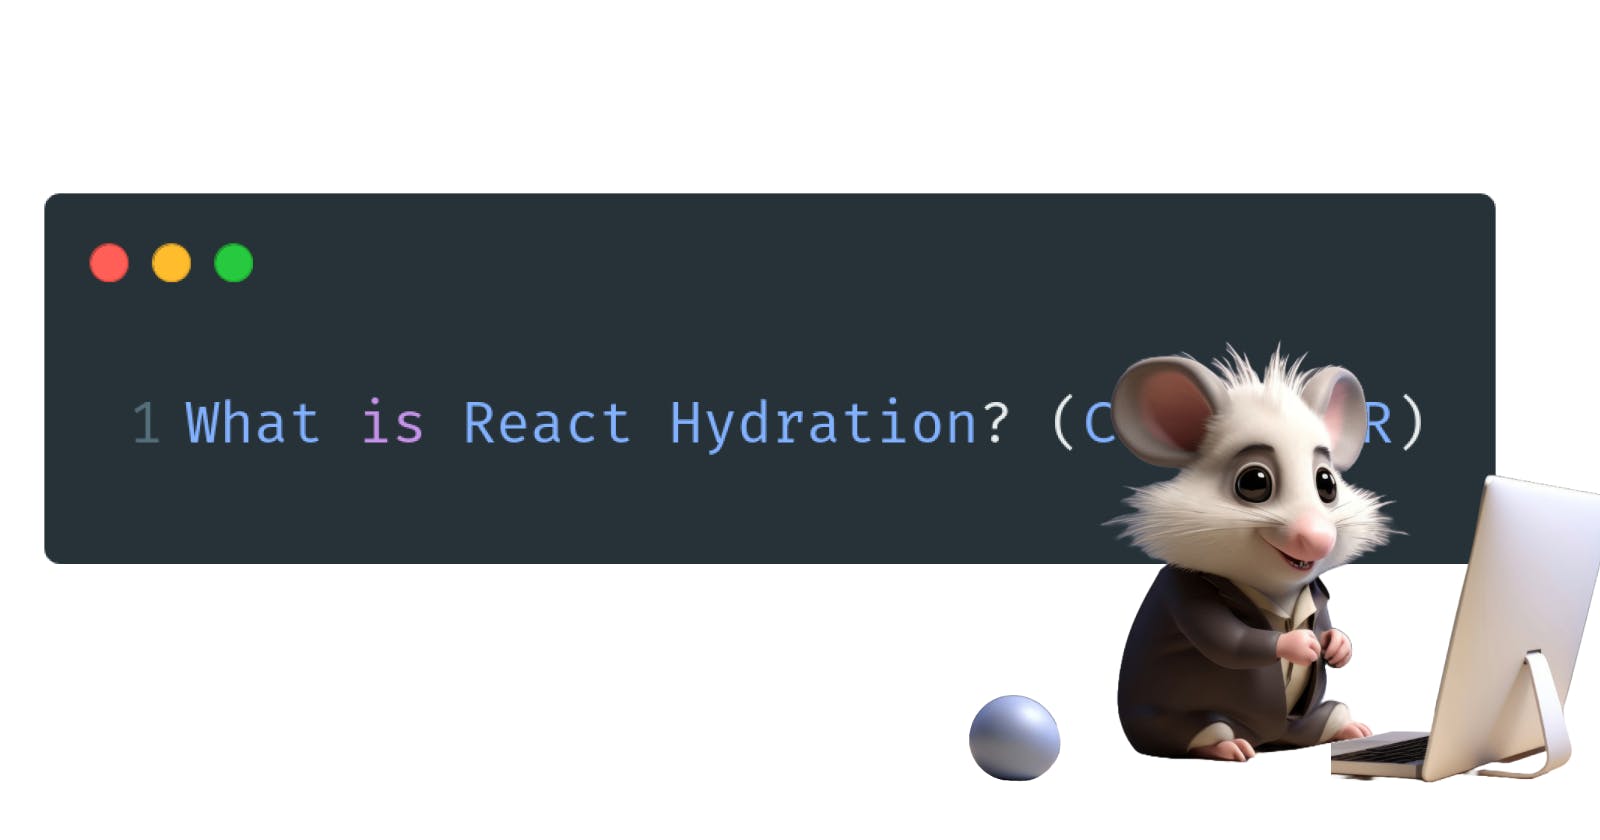 What is React Hydration?